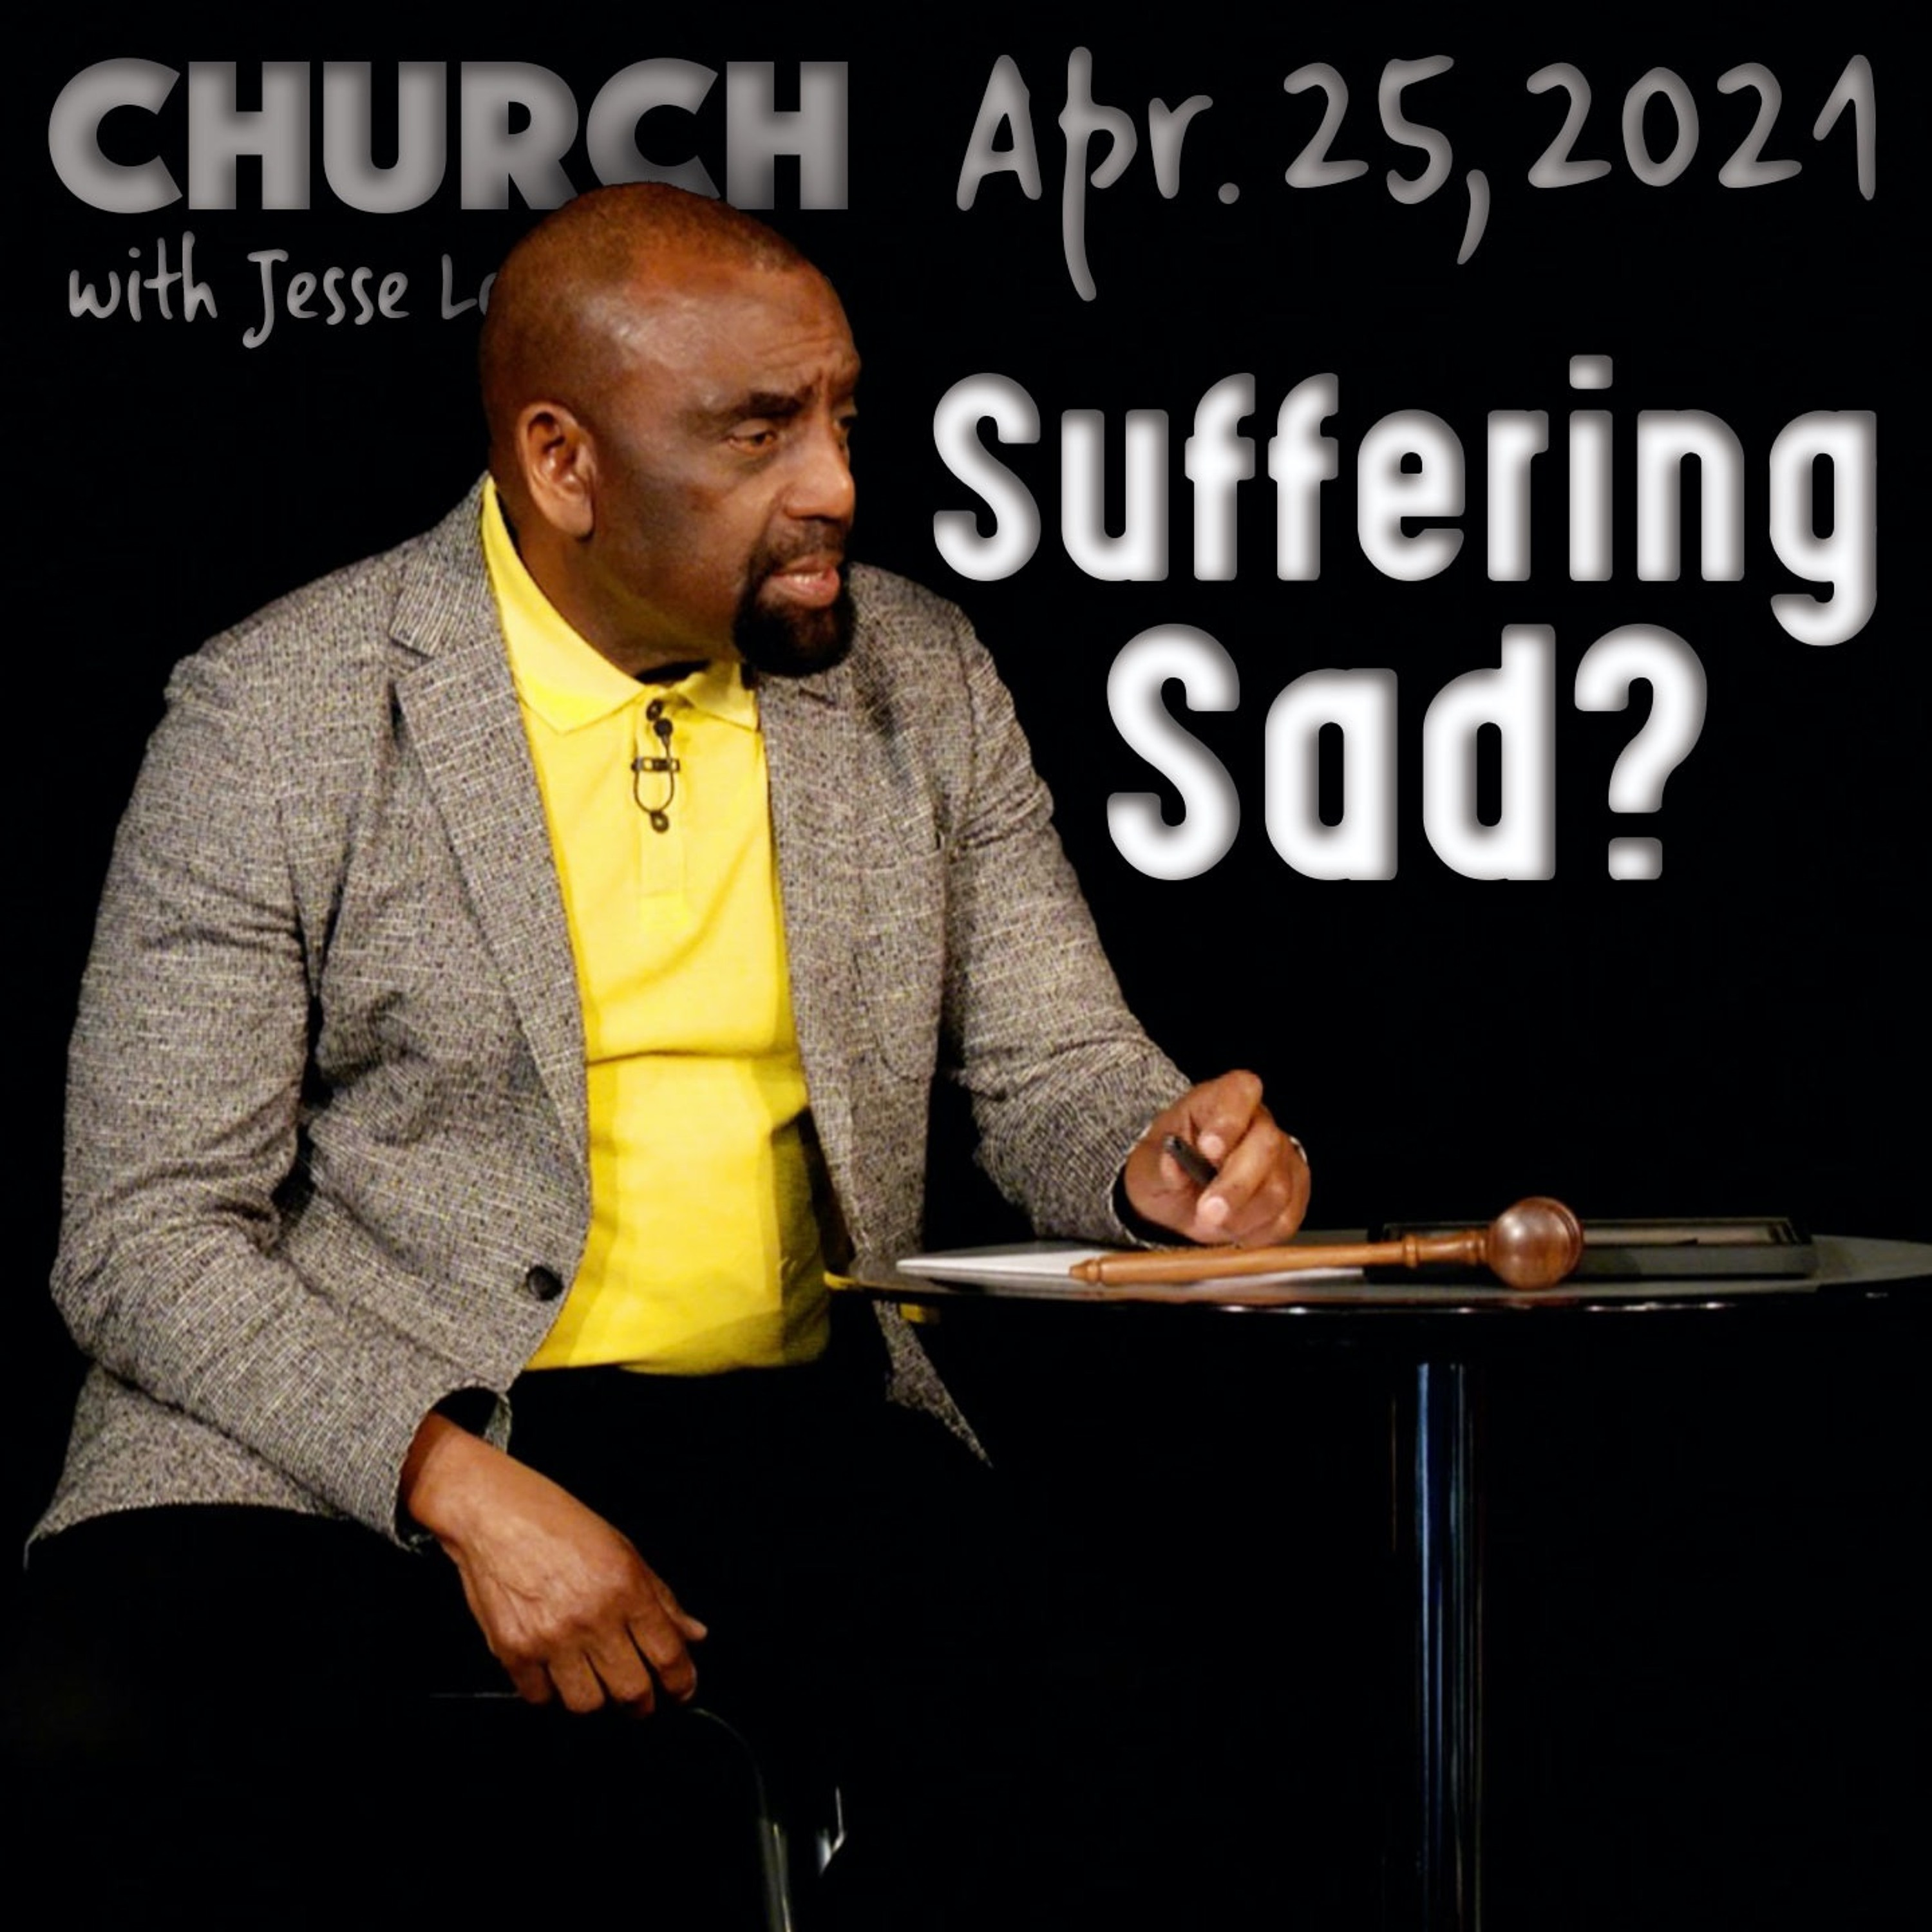 04/25/21 Why Is Suffering Sad? (Church)